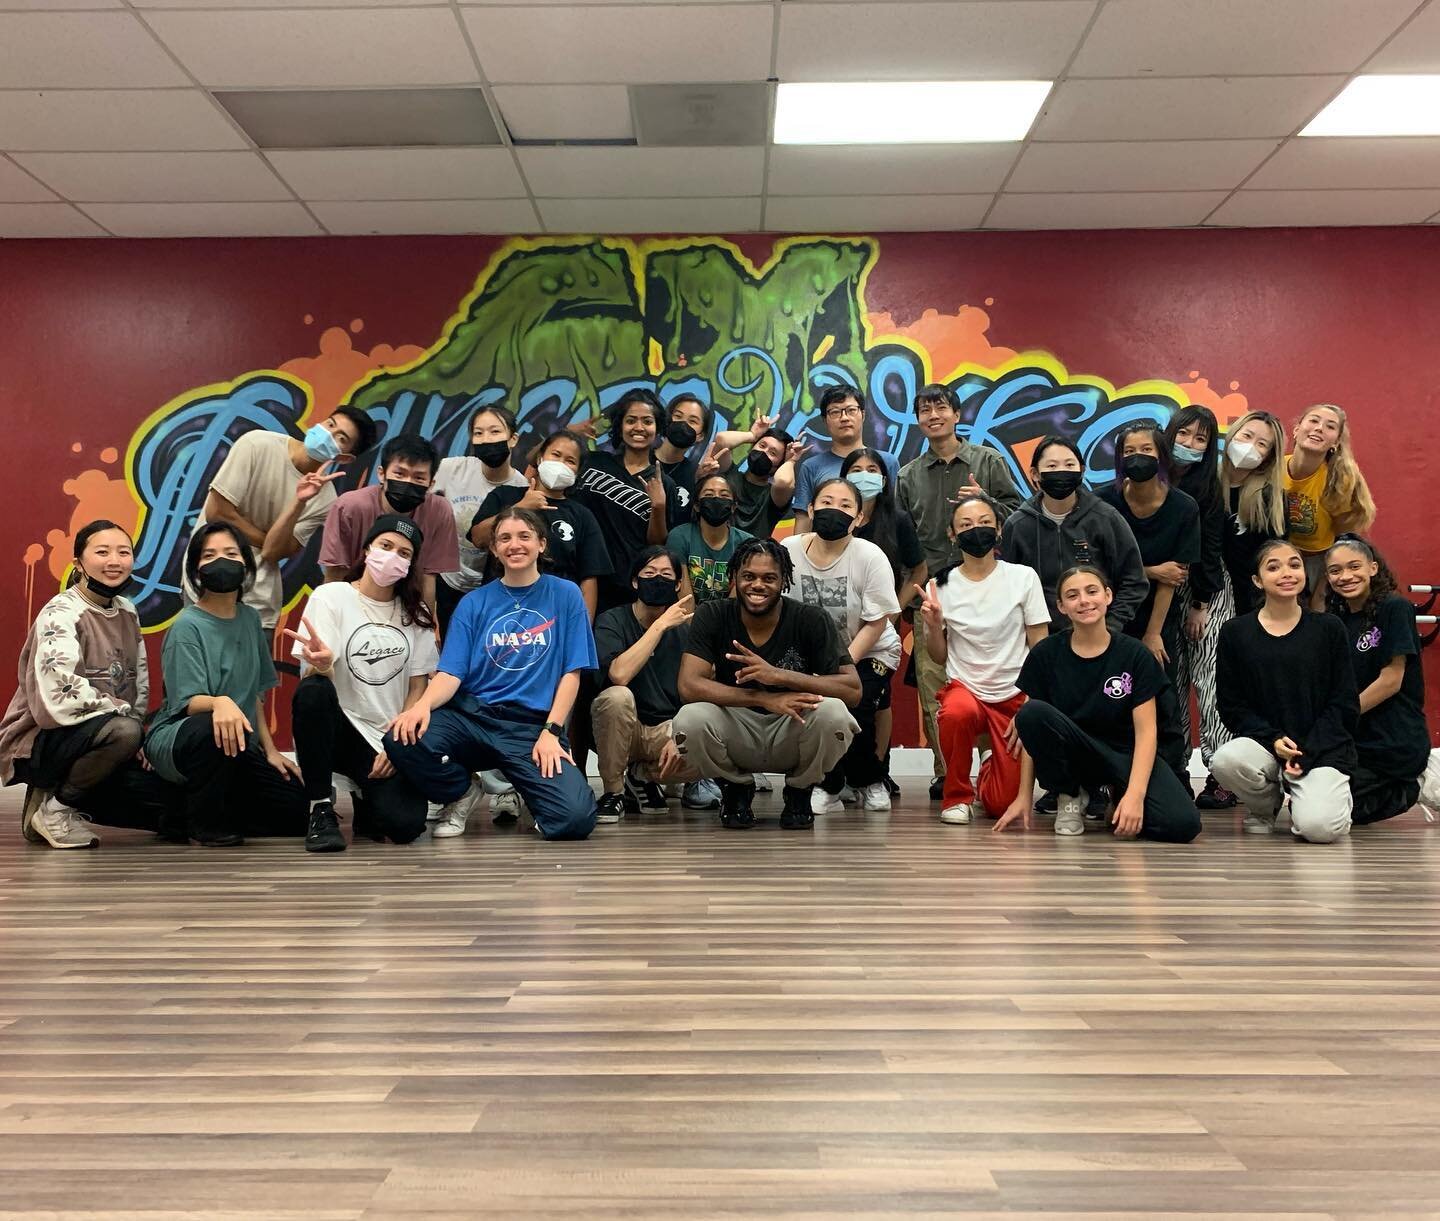 A huge thank you to @weezythephoenix, a judge at @waackcracklelock, for taking time out of his busy weekend to teach Str8jacket a waacking &amp; housing fusion class! We are all so grateful for the education, and your passion for dance is truly infec